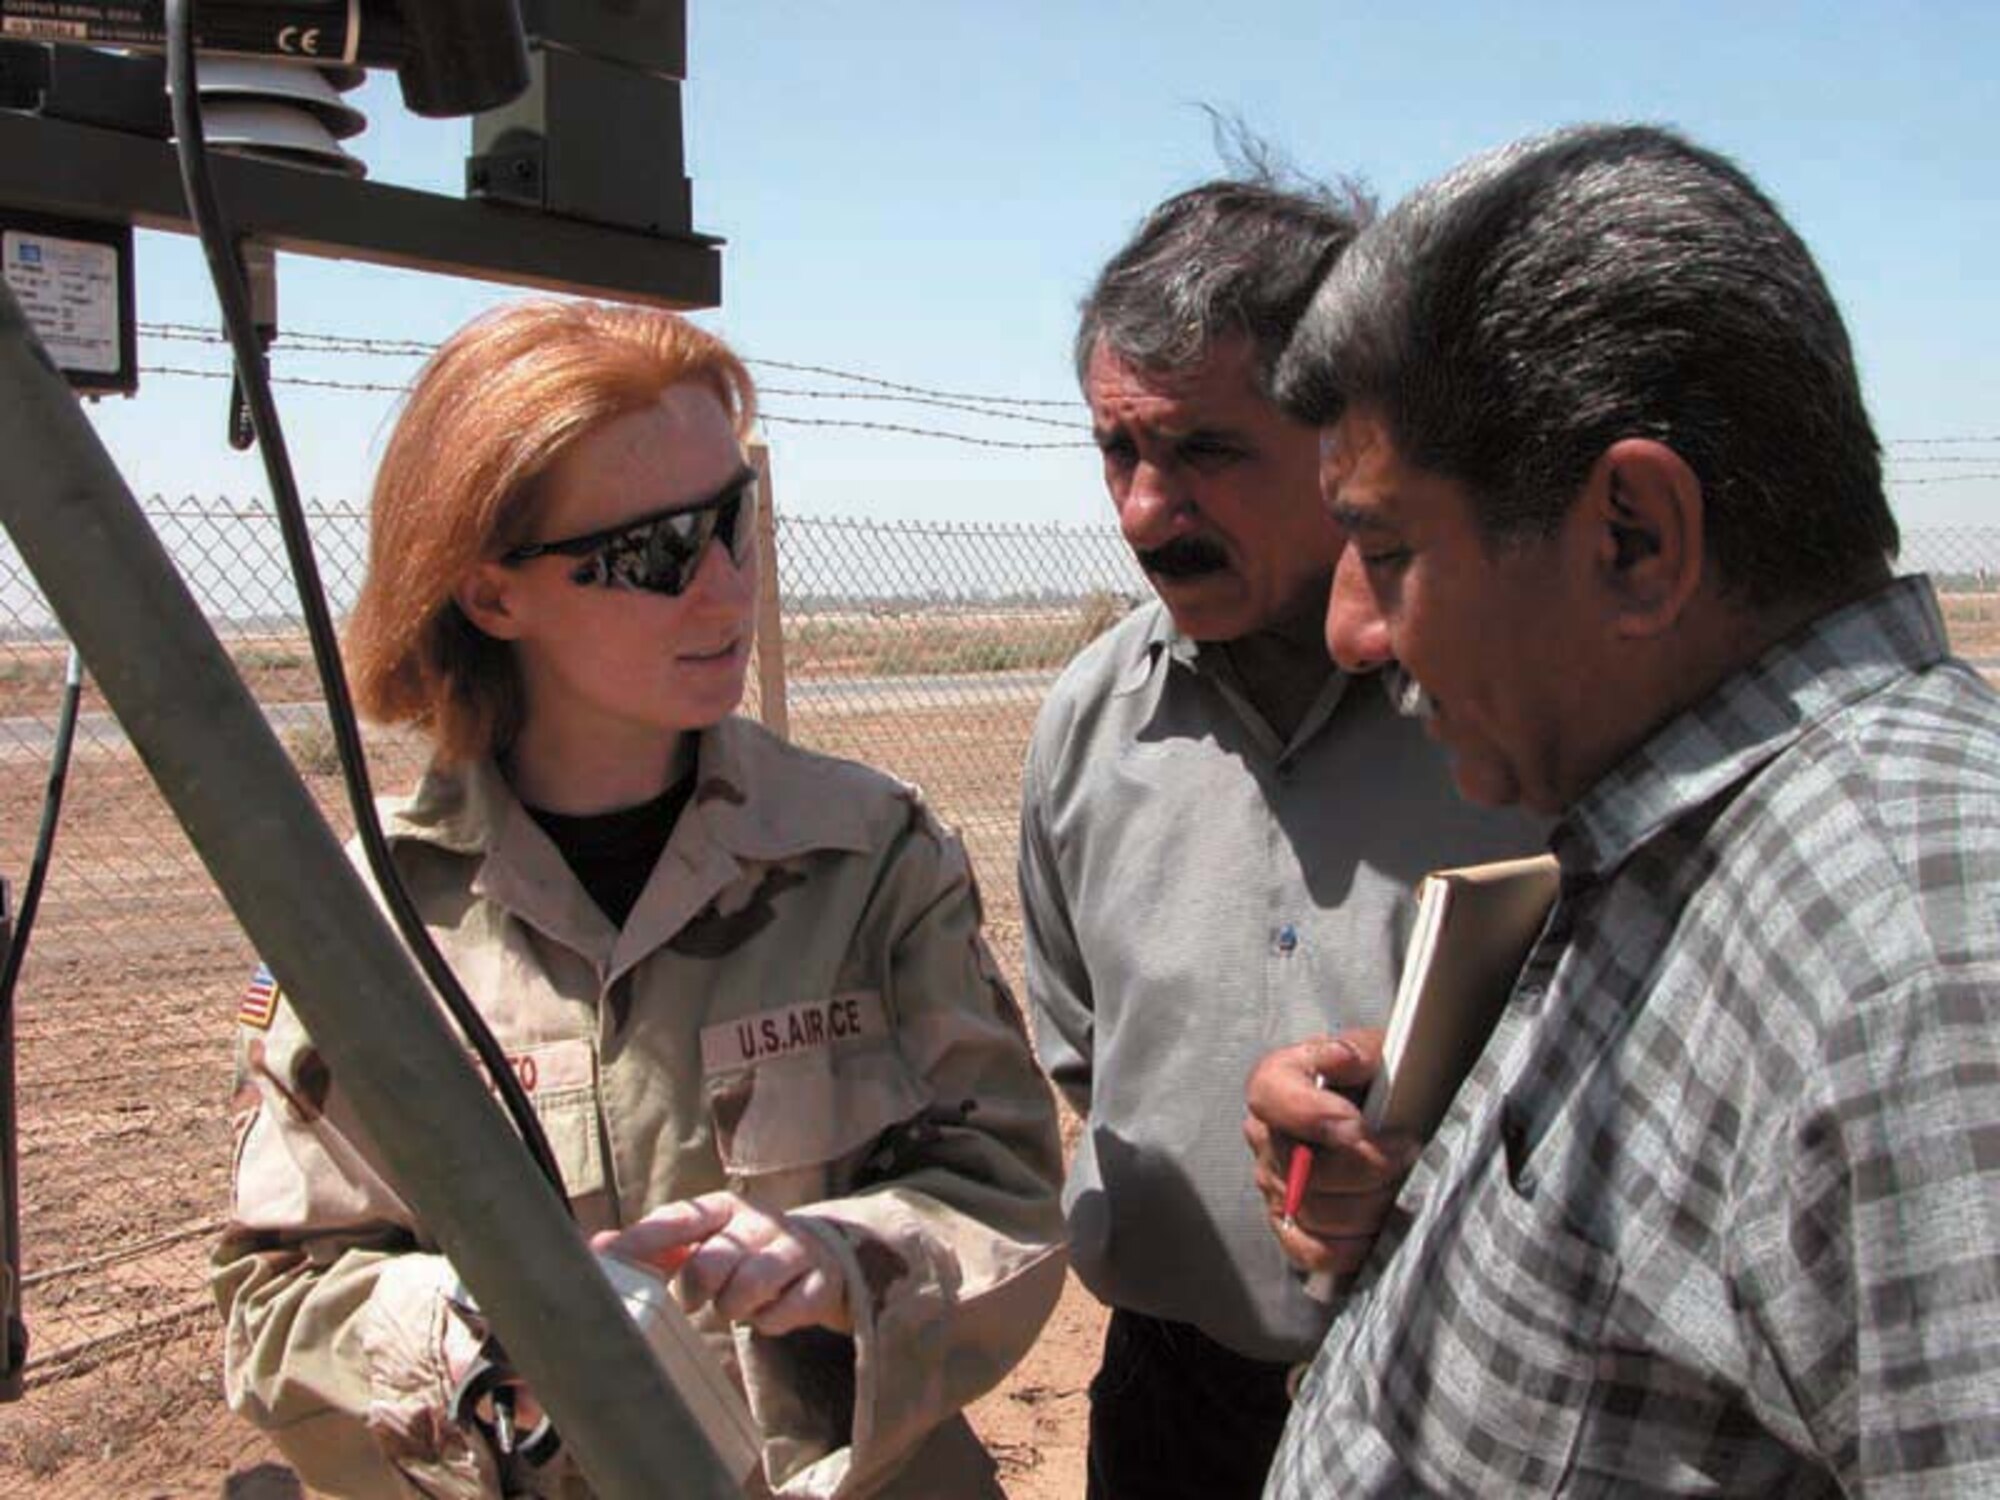 OPERATION IRAQI FREEDOM -- Staff Sgt. Julie Moretto answers questions by members of Iraq's meteorological organization.  Moretto is a 447th Air Expeditionary Group airman deployed to Baghdad from the 15th Air Support Operations Squadron at Hunter Army Air Field, Ga.  (U.S. Air Force photo by 2nd Lt. Rebecca R. Garland)